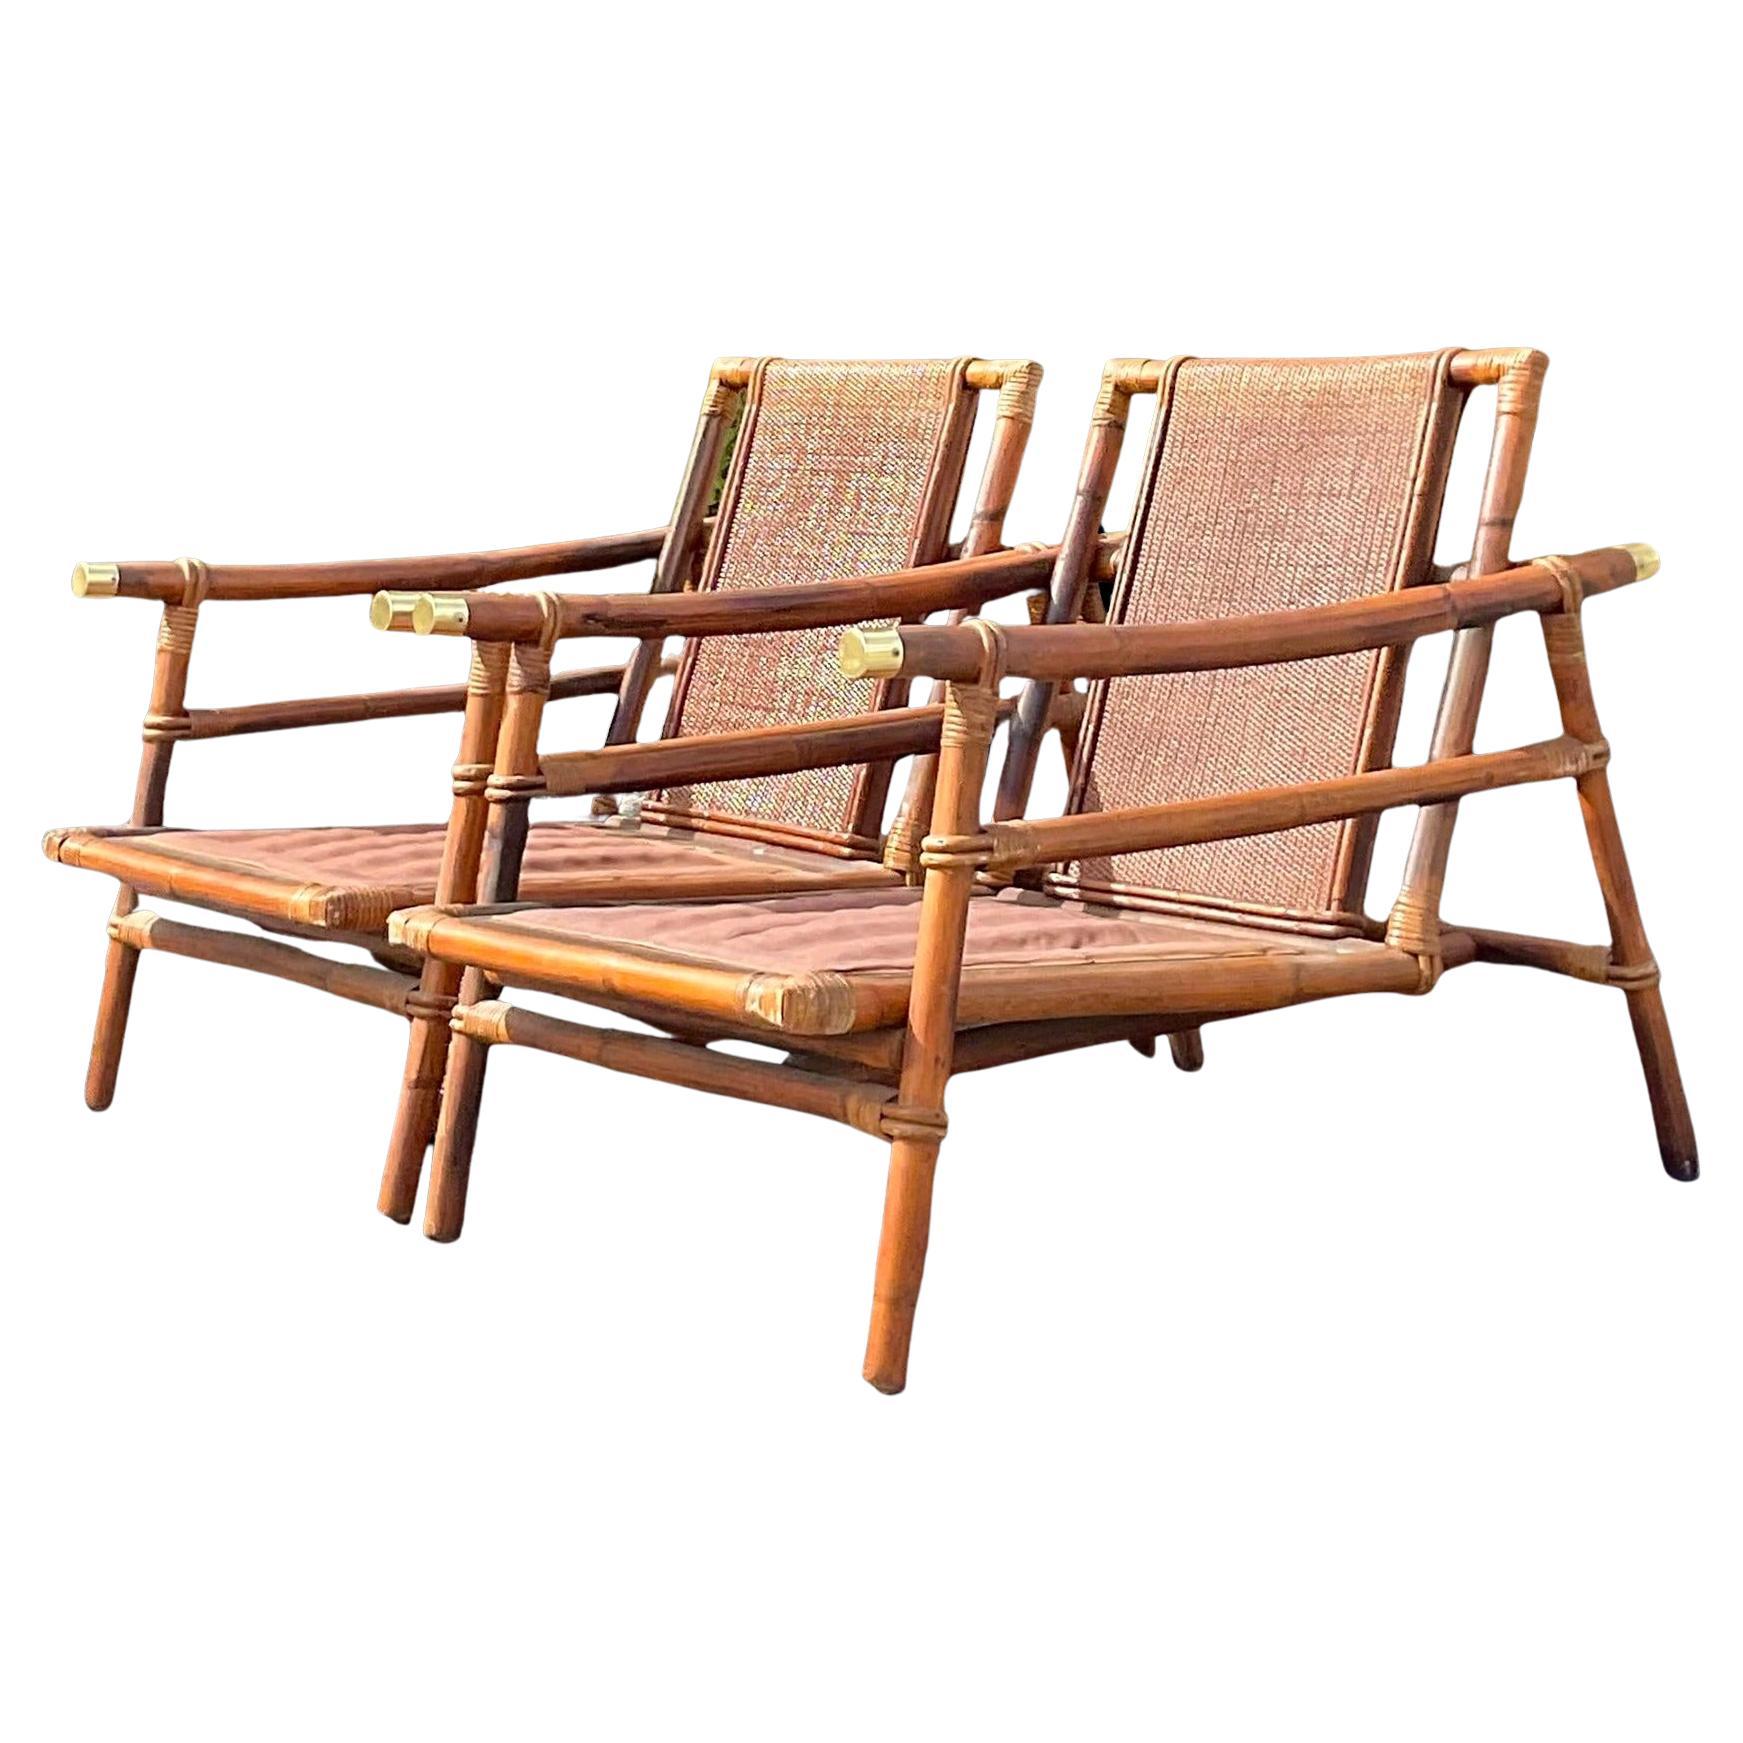 Vintage John Wisner for Ficks Reed Pagoda Rattan Lounge Chairs - a Pair For Sale